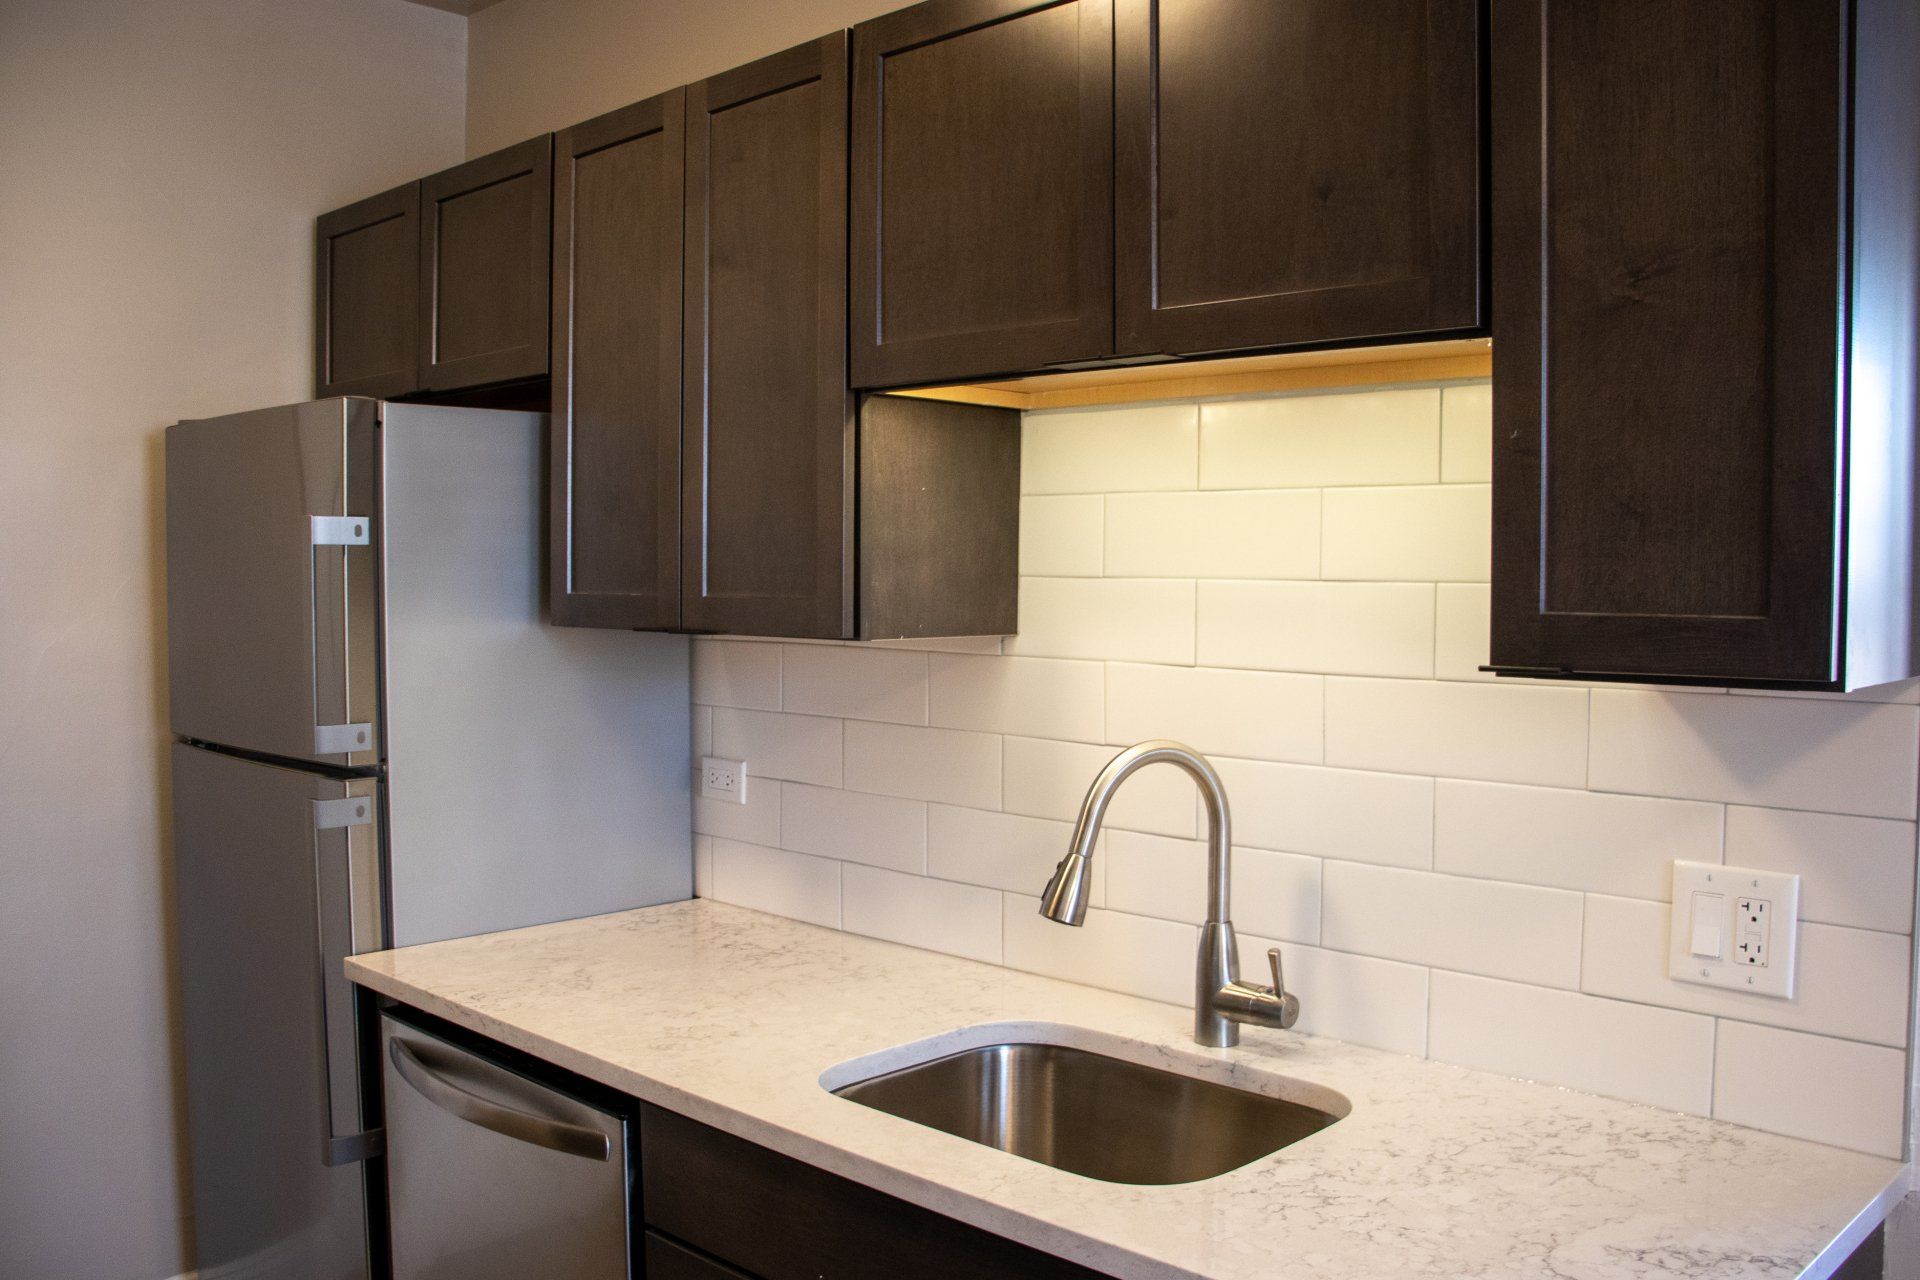 A kitchen with a sink, refrigerator, and dishwasher at Reside at 849.